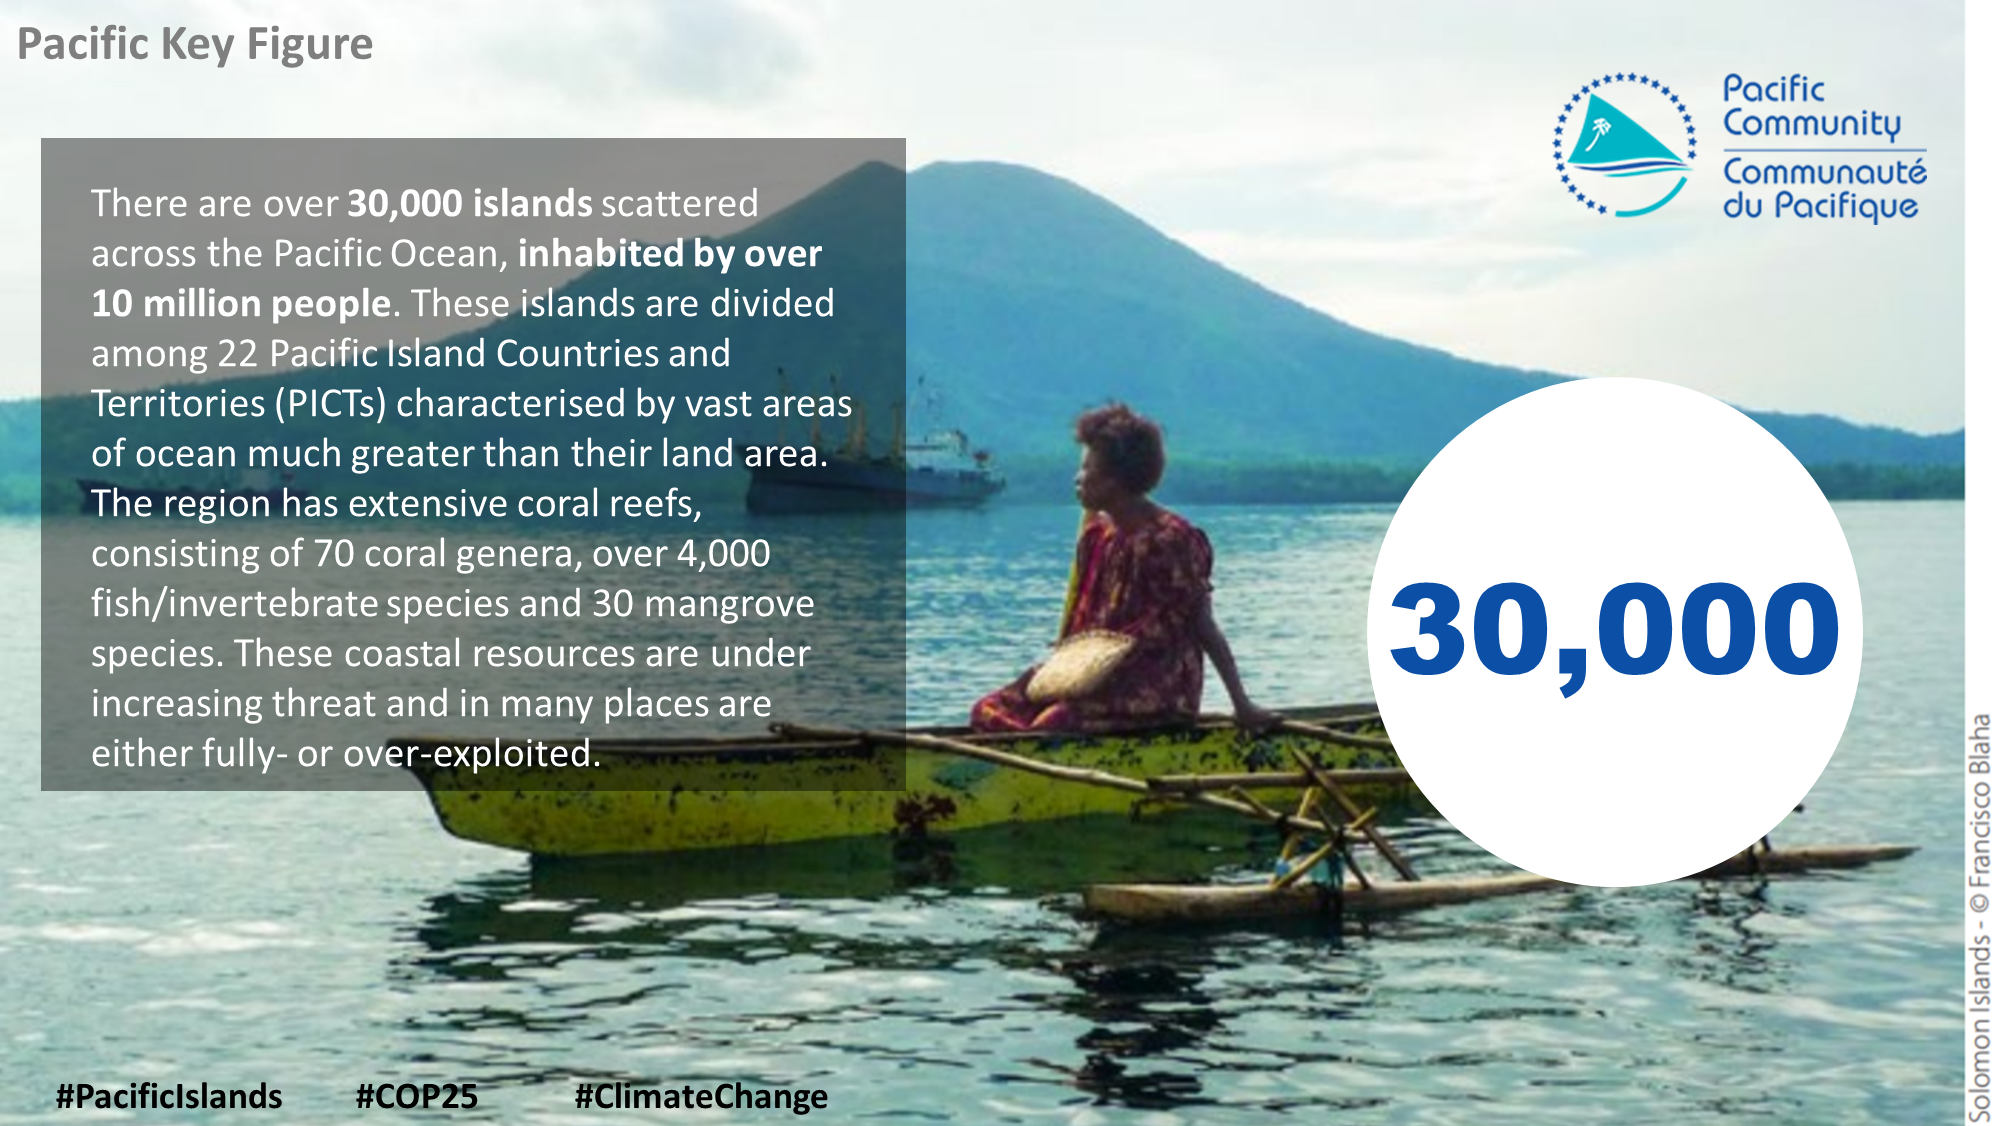 There are over 30,000 islands scattered across the Pacific Ocean, inhabited by over 10 million people. 